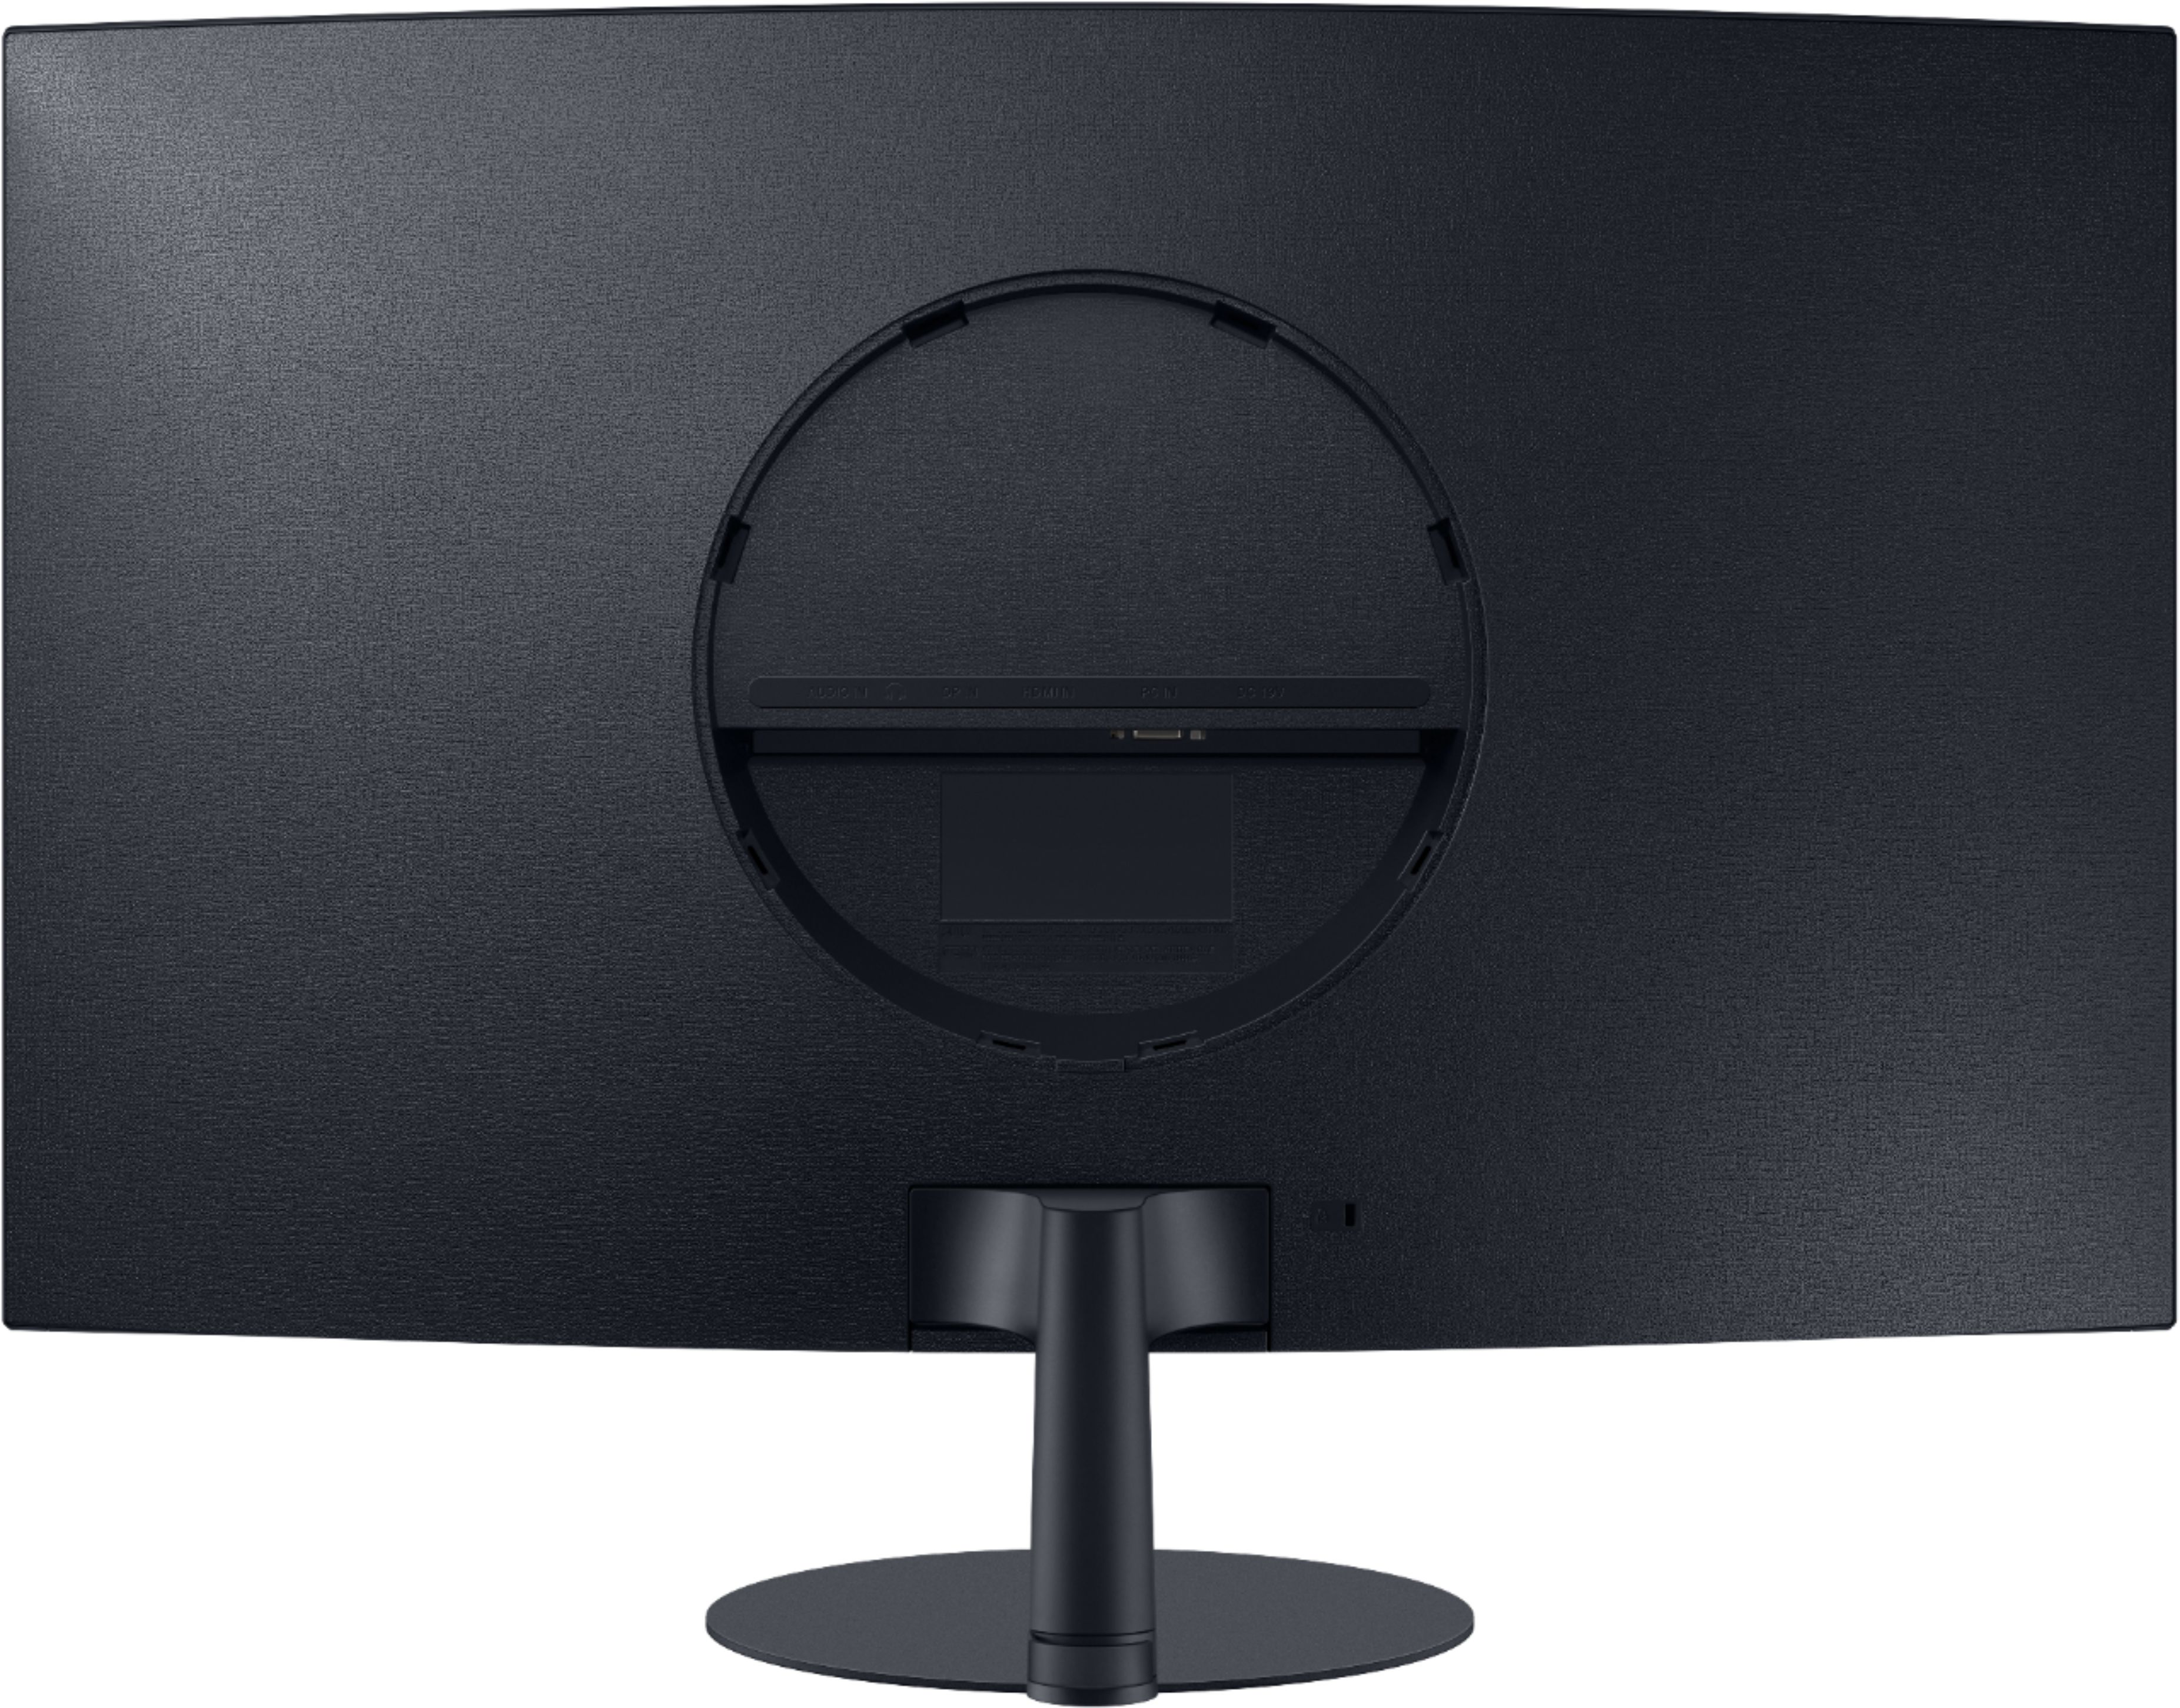 Back View: Samsung - Geek Squad Certified Refurbished Odyssey G77 Series 27" LED Curved QHD QLED Monitor with HDR - Black